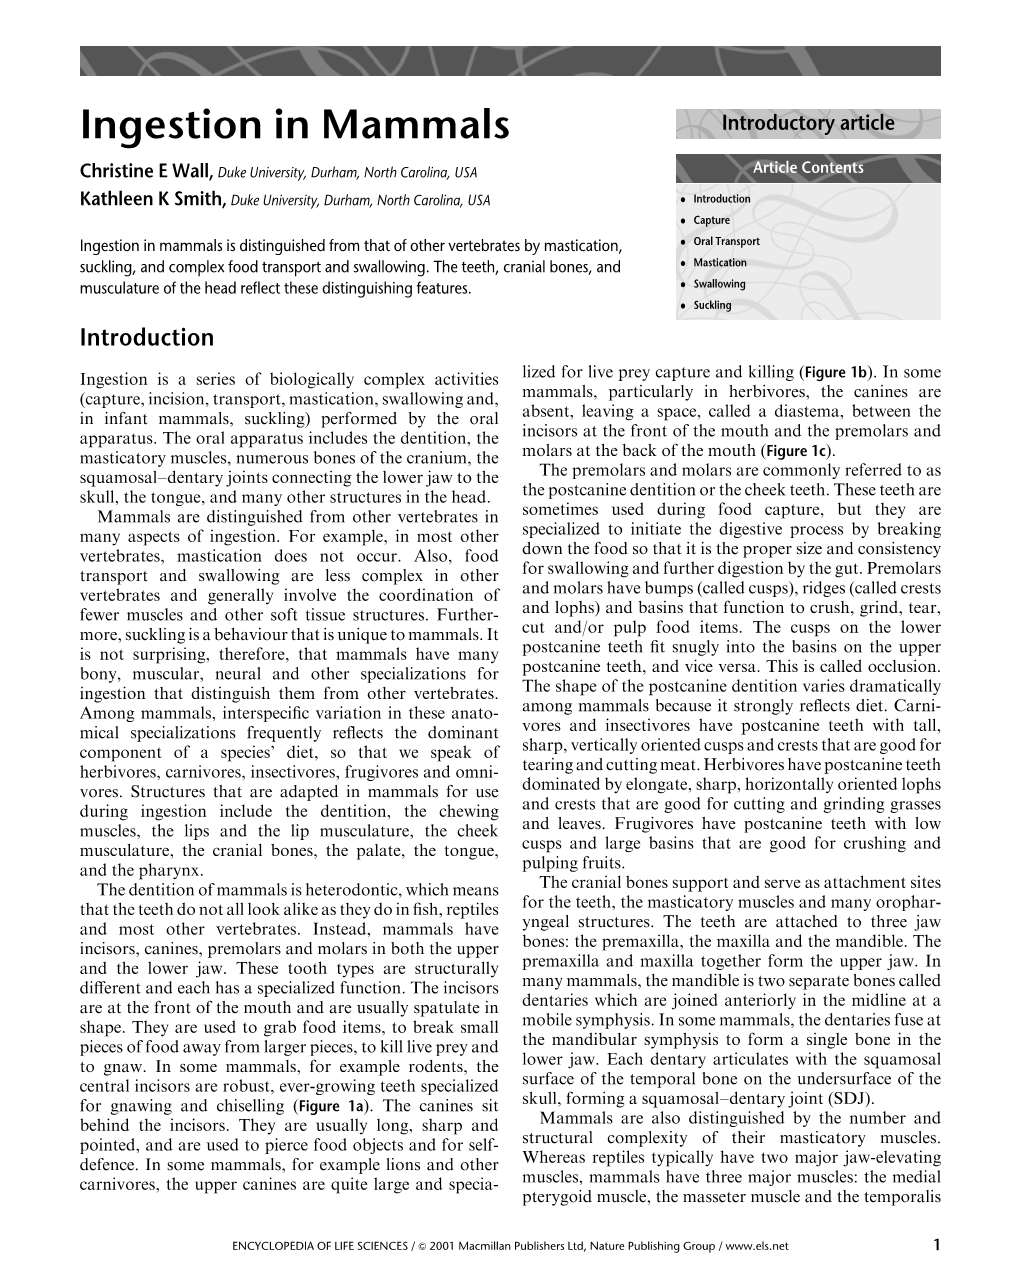 Ingestion in Mammals Introductory Article